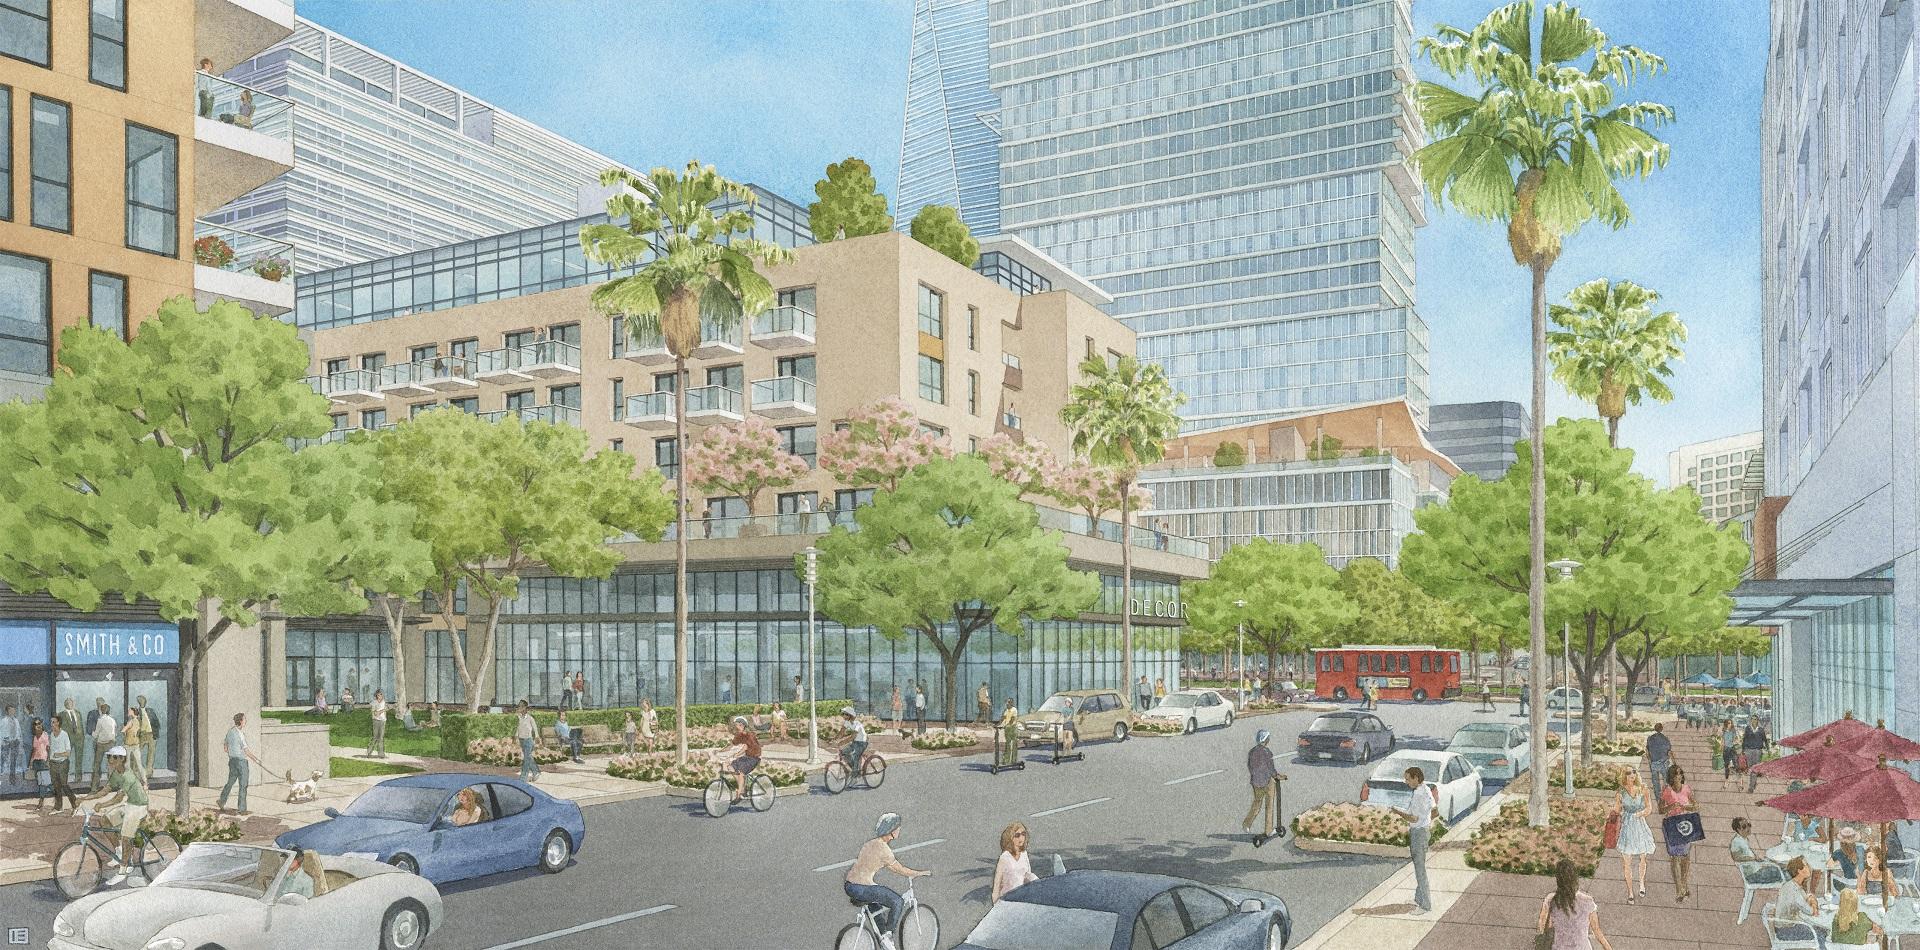 The Village At Westfield Topanga Aims to be Alternative For Everyone